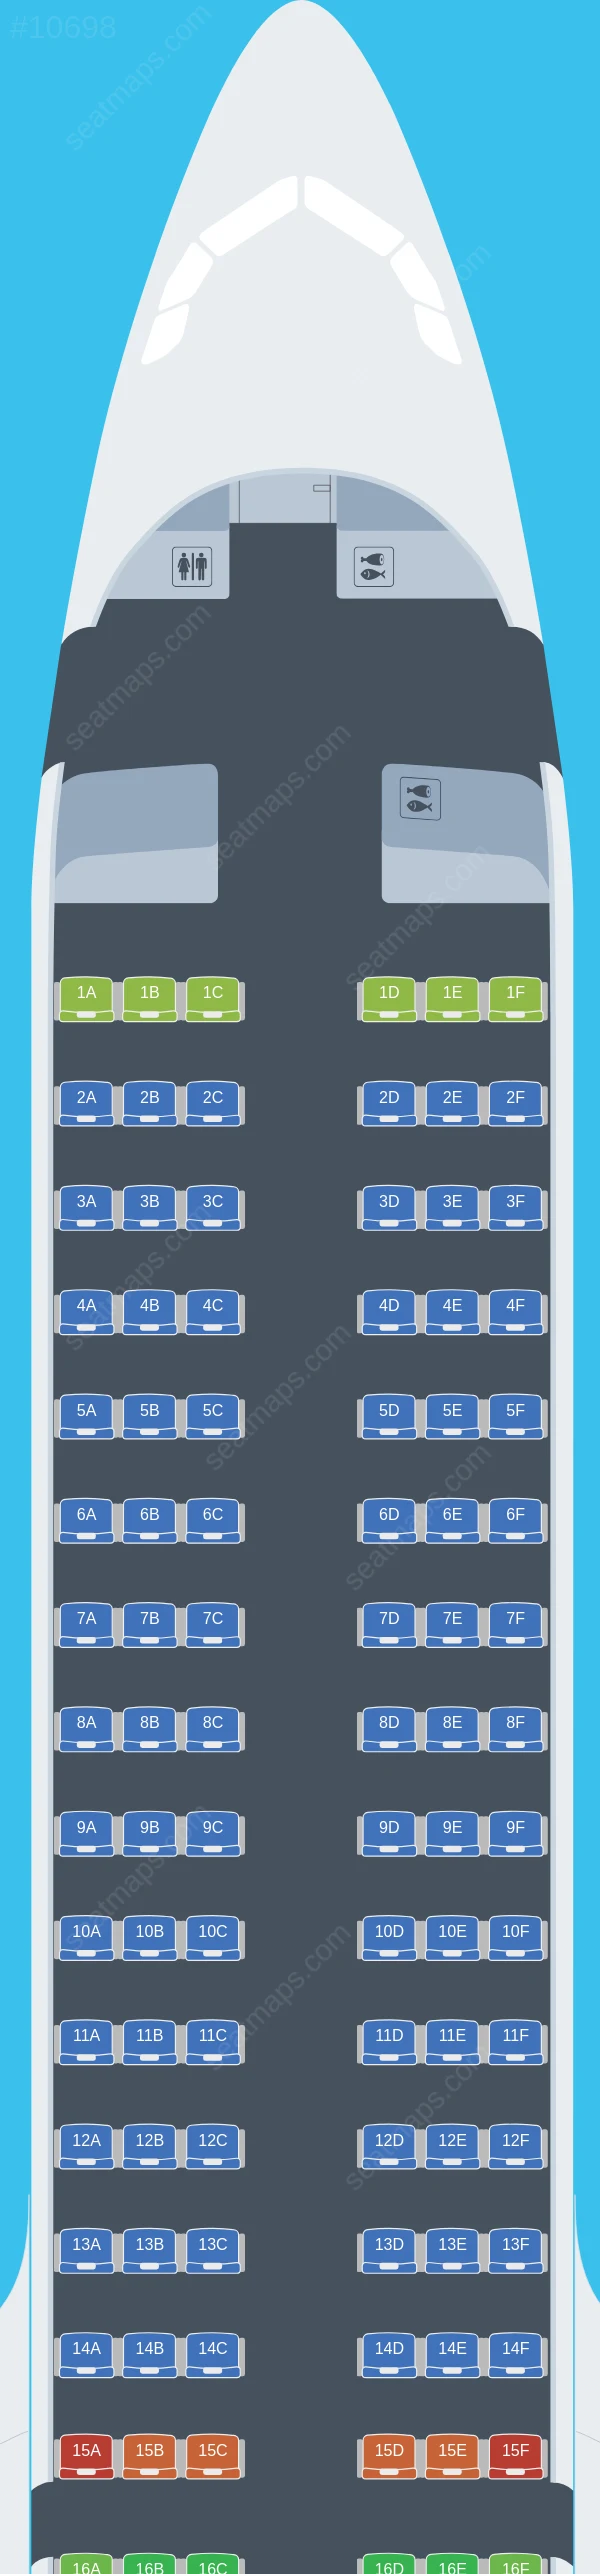 British Airways Airbus A321neo aircraft seat map A321neo